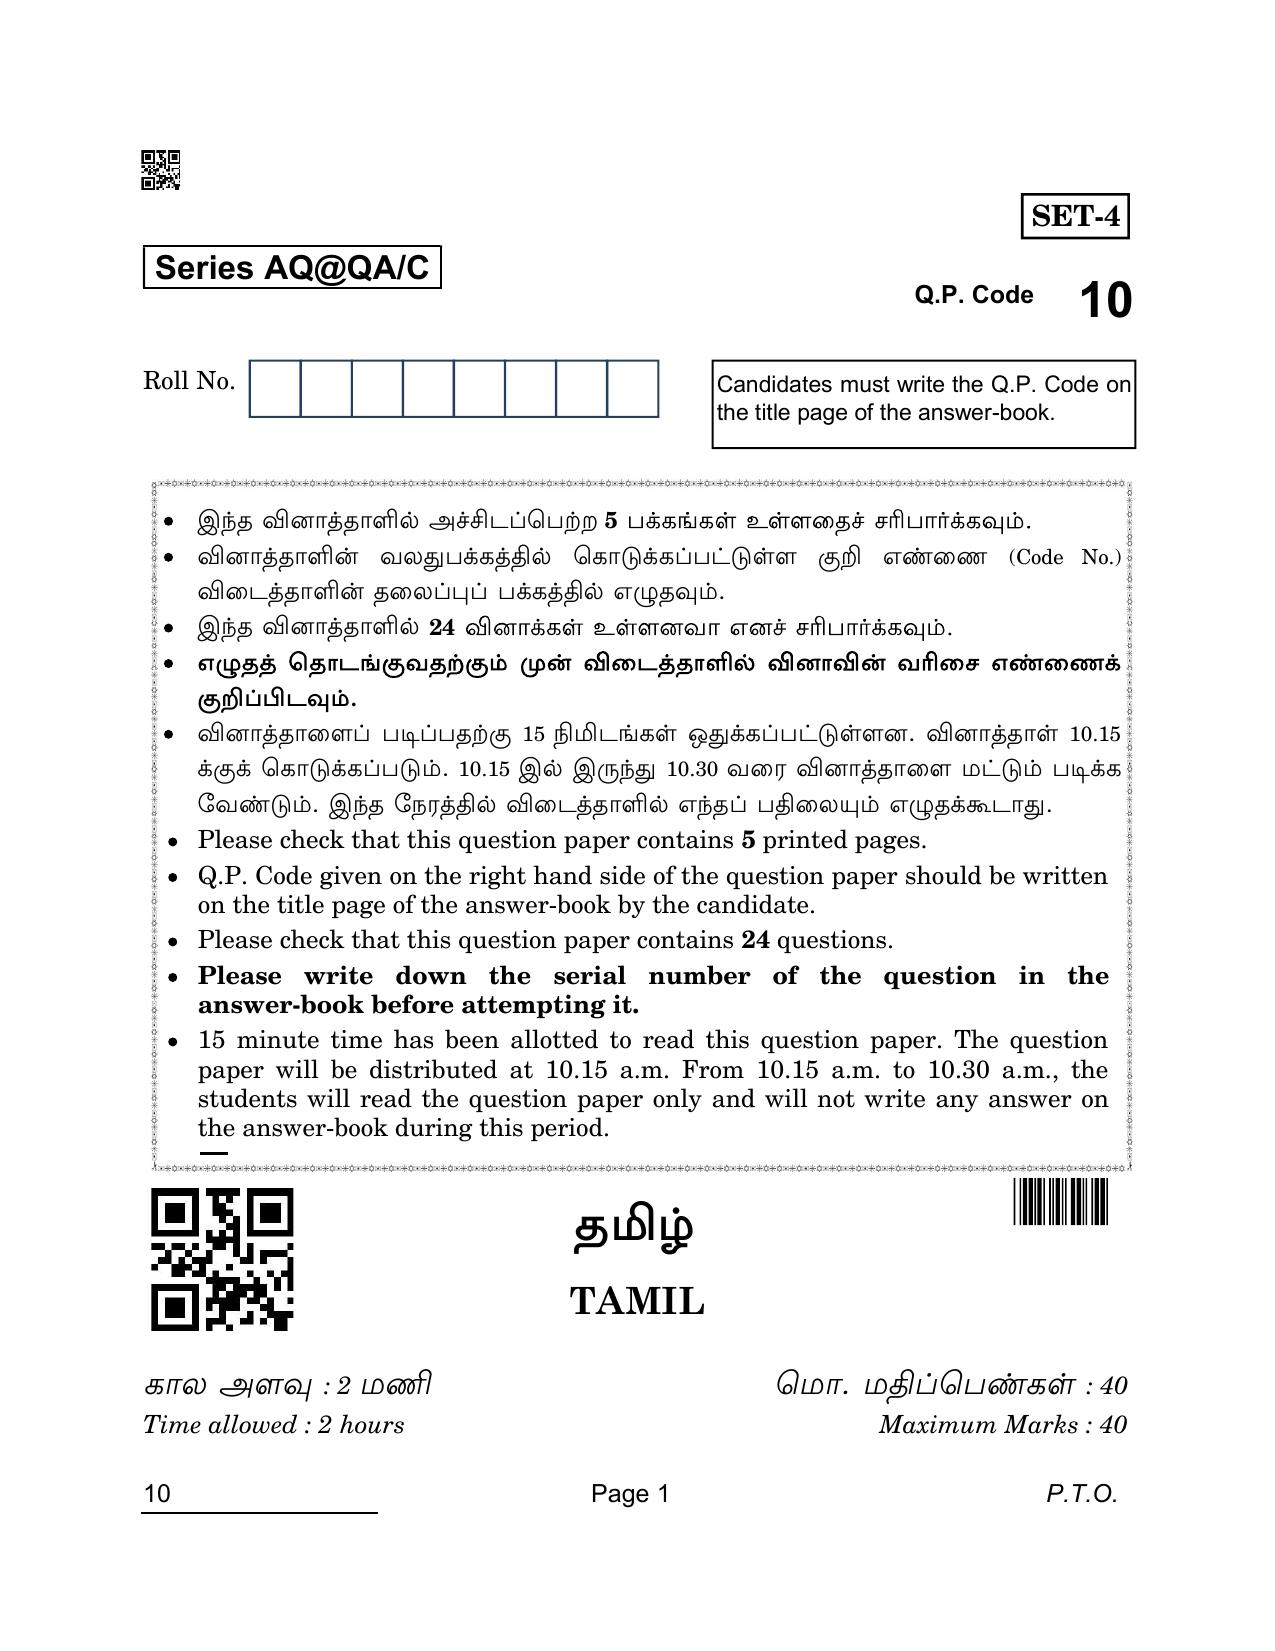 CBSE Class 10 10 Tamil 2022 Compartment Question Paper - Page 1